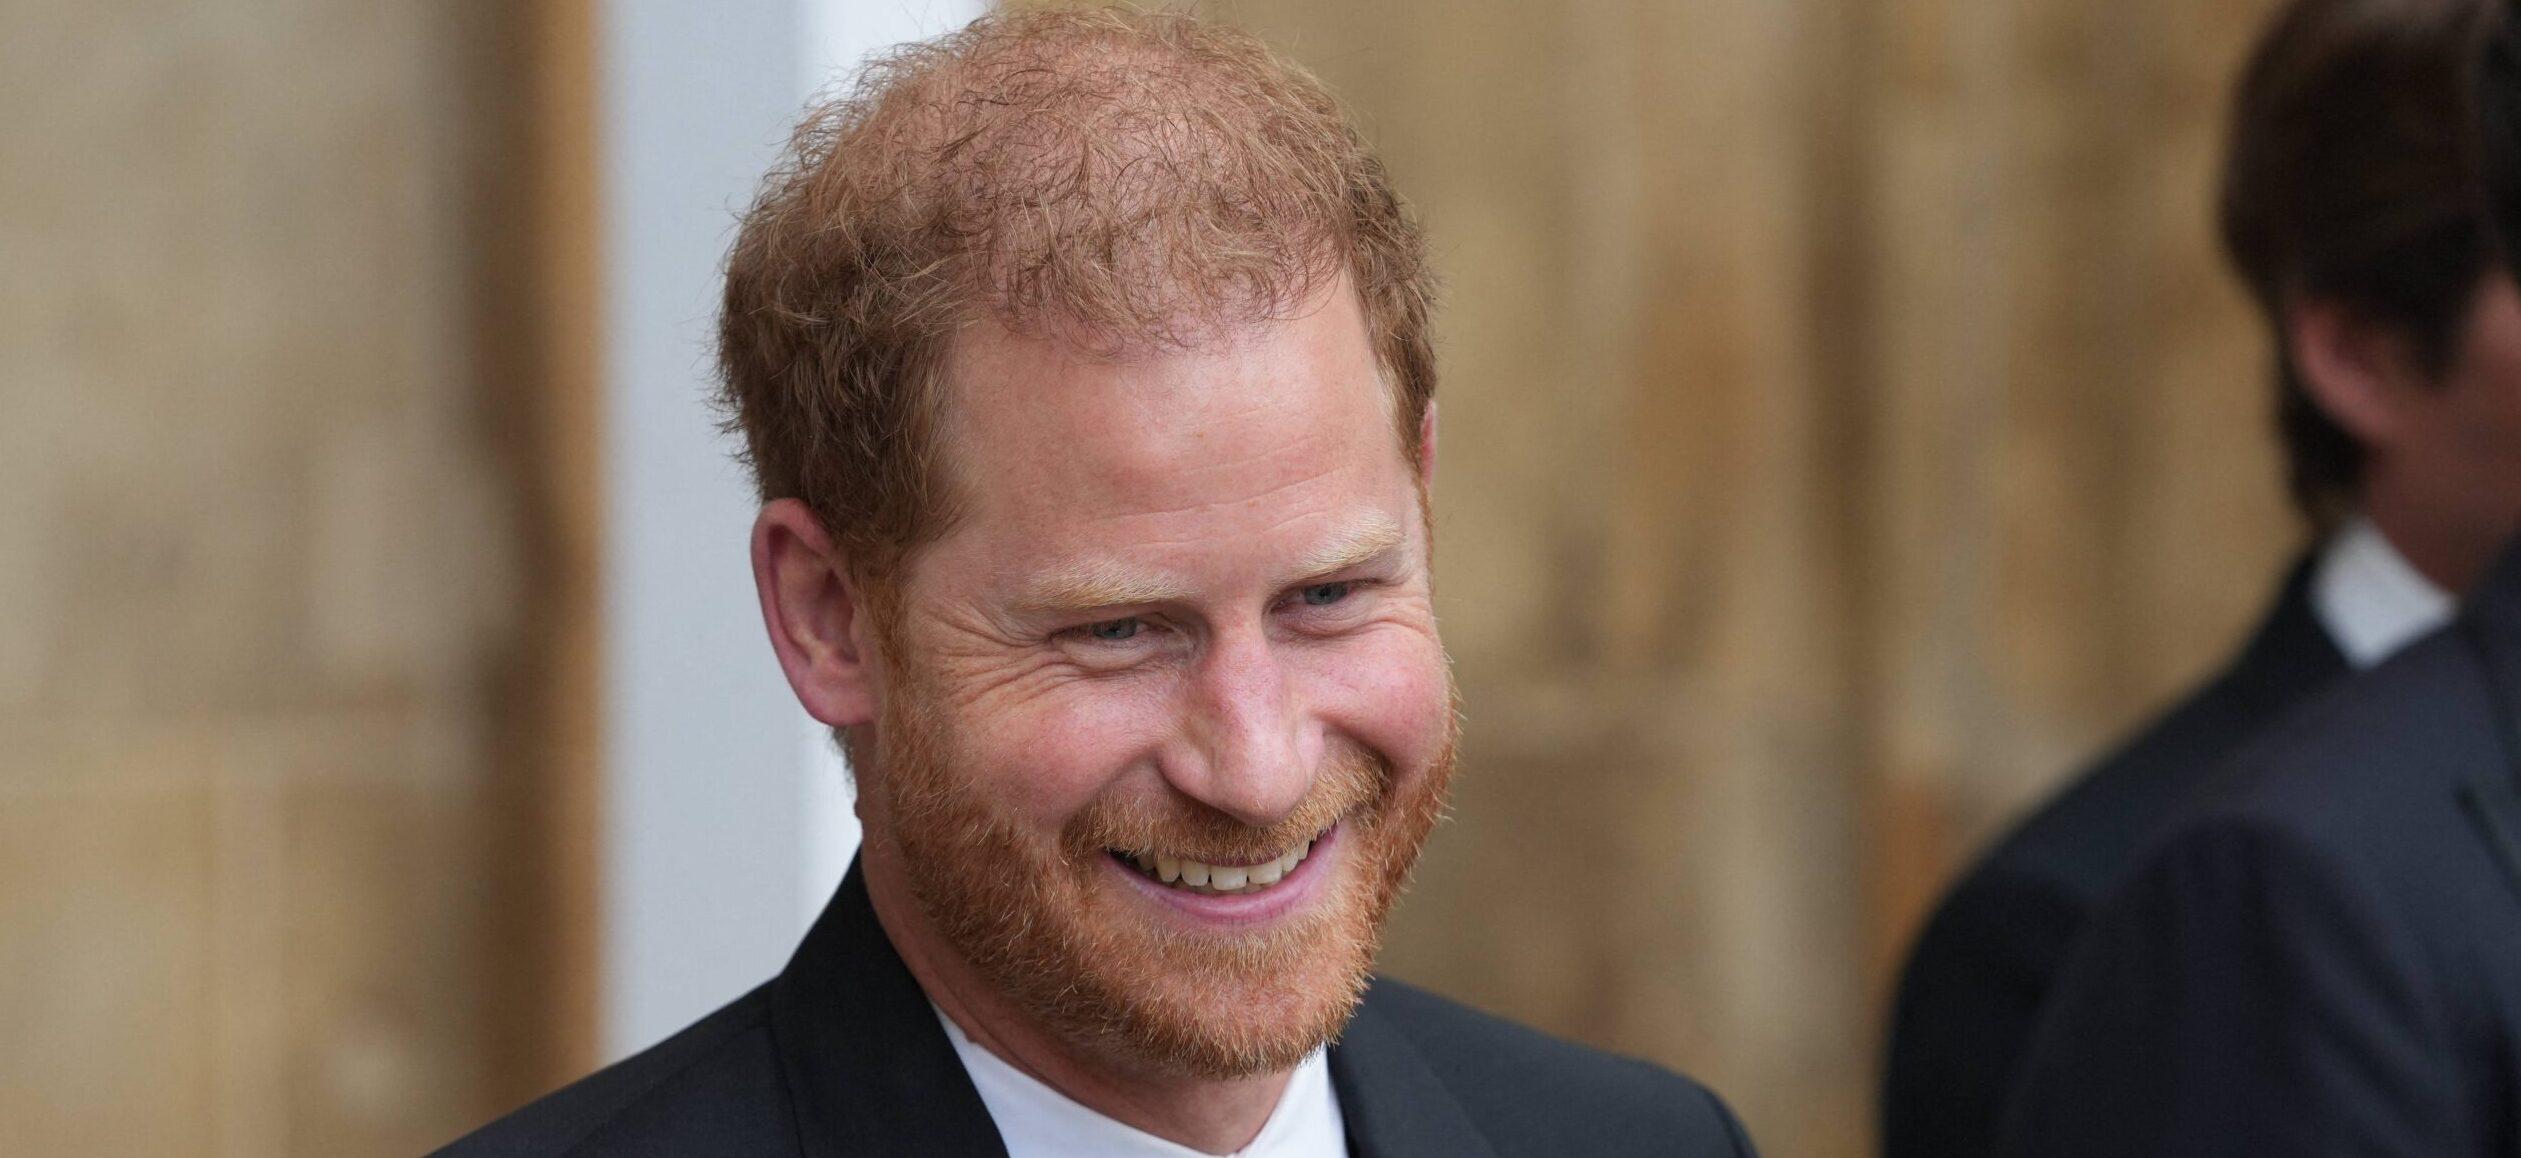 Prince Harry’s Lawsuit Against The Sun Publisher To Go To Trial, Phone Hacking Claim Dismissed